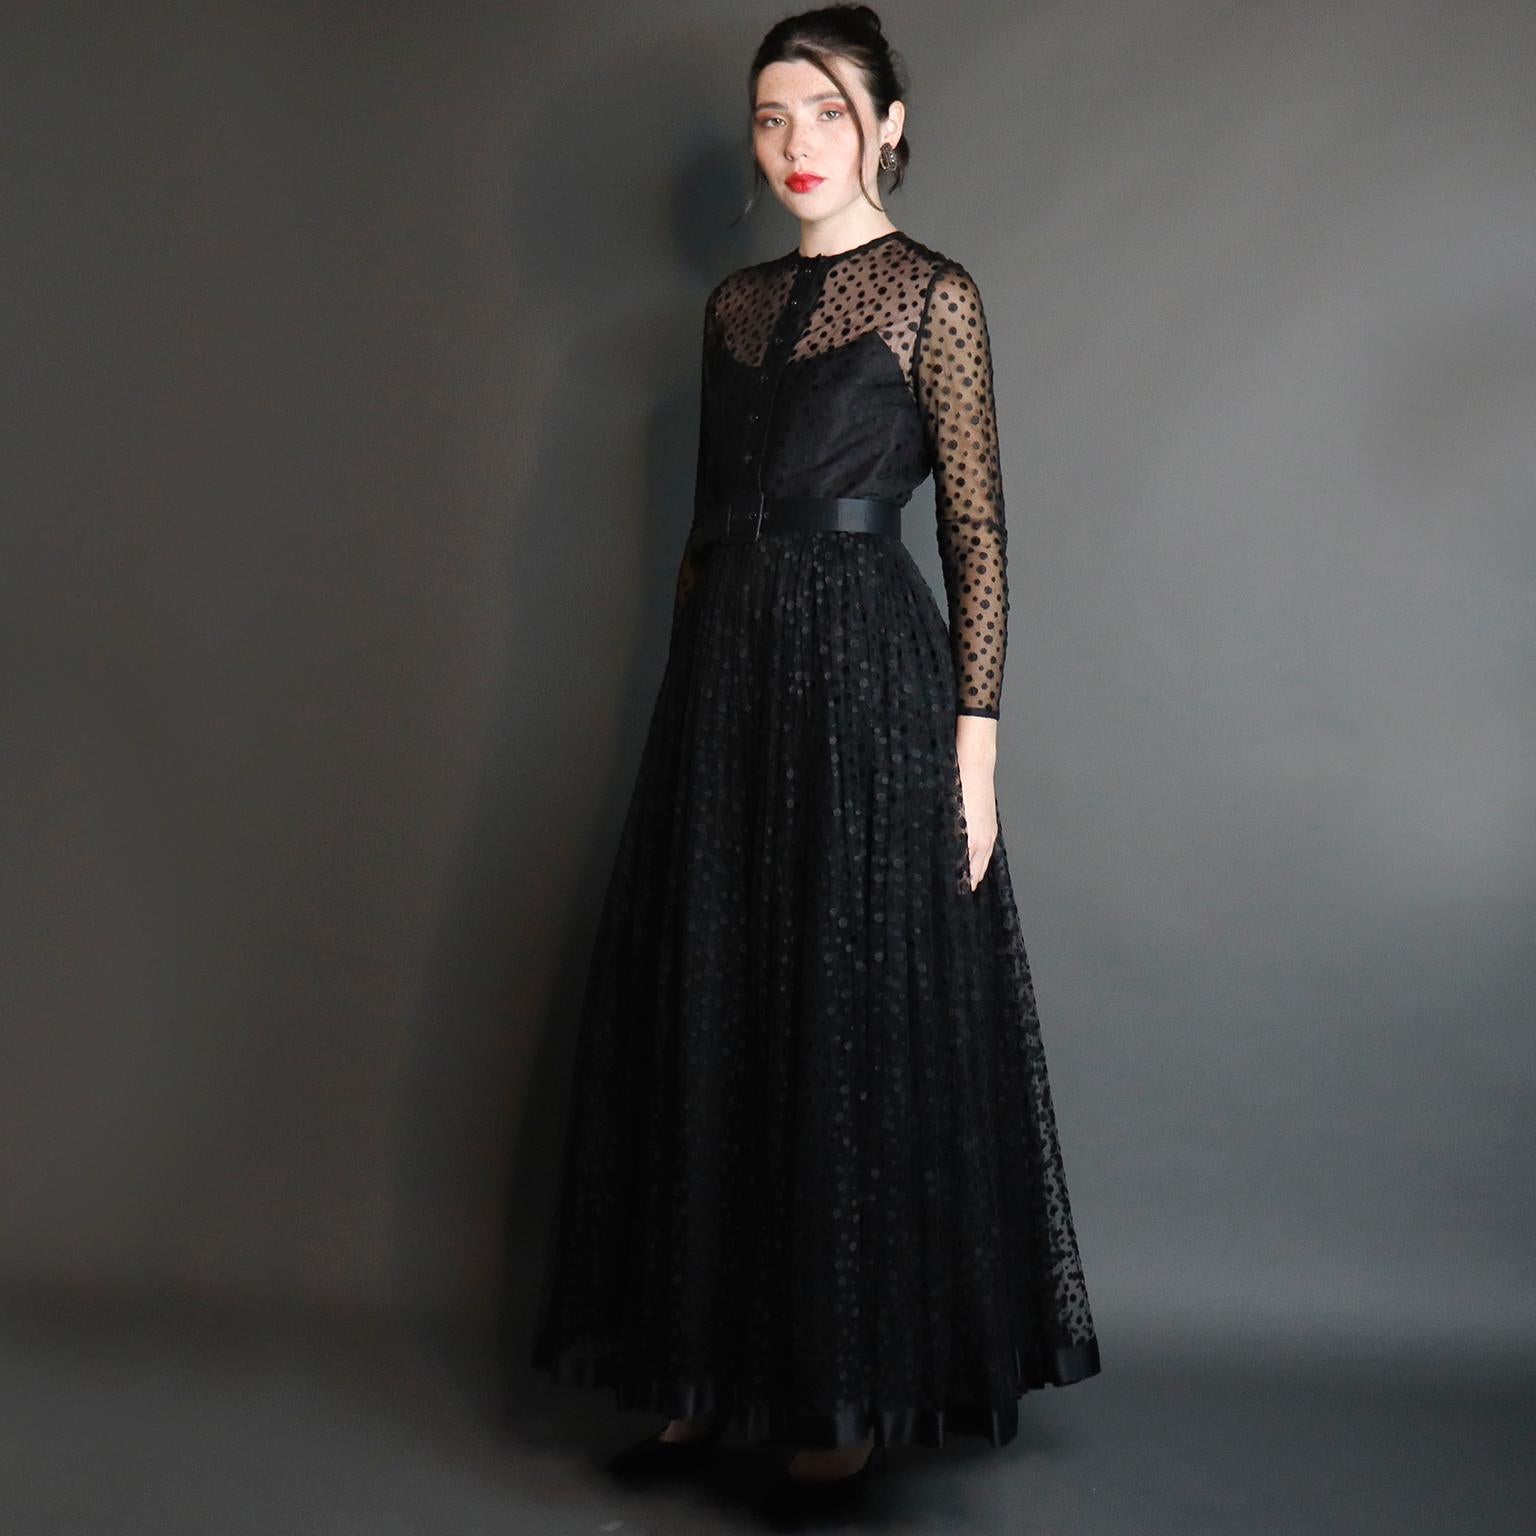 This is a truly sensational vintage black evening gown designed by Bill Blass in the 1970's. This gorgeous dress has luscious layers of black dot netting over black silk taffeta. The dress is fitted at the waist and has its original black silk belt